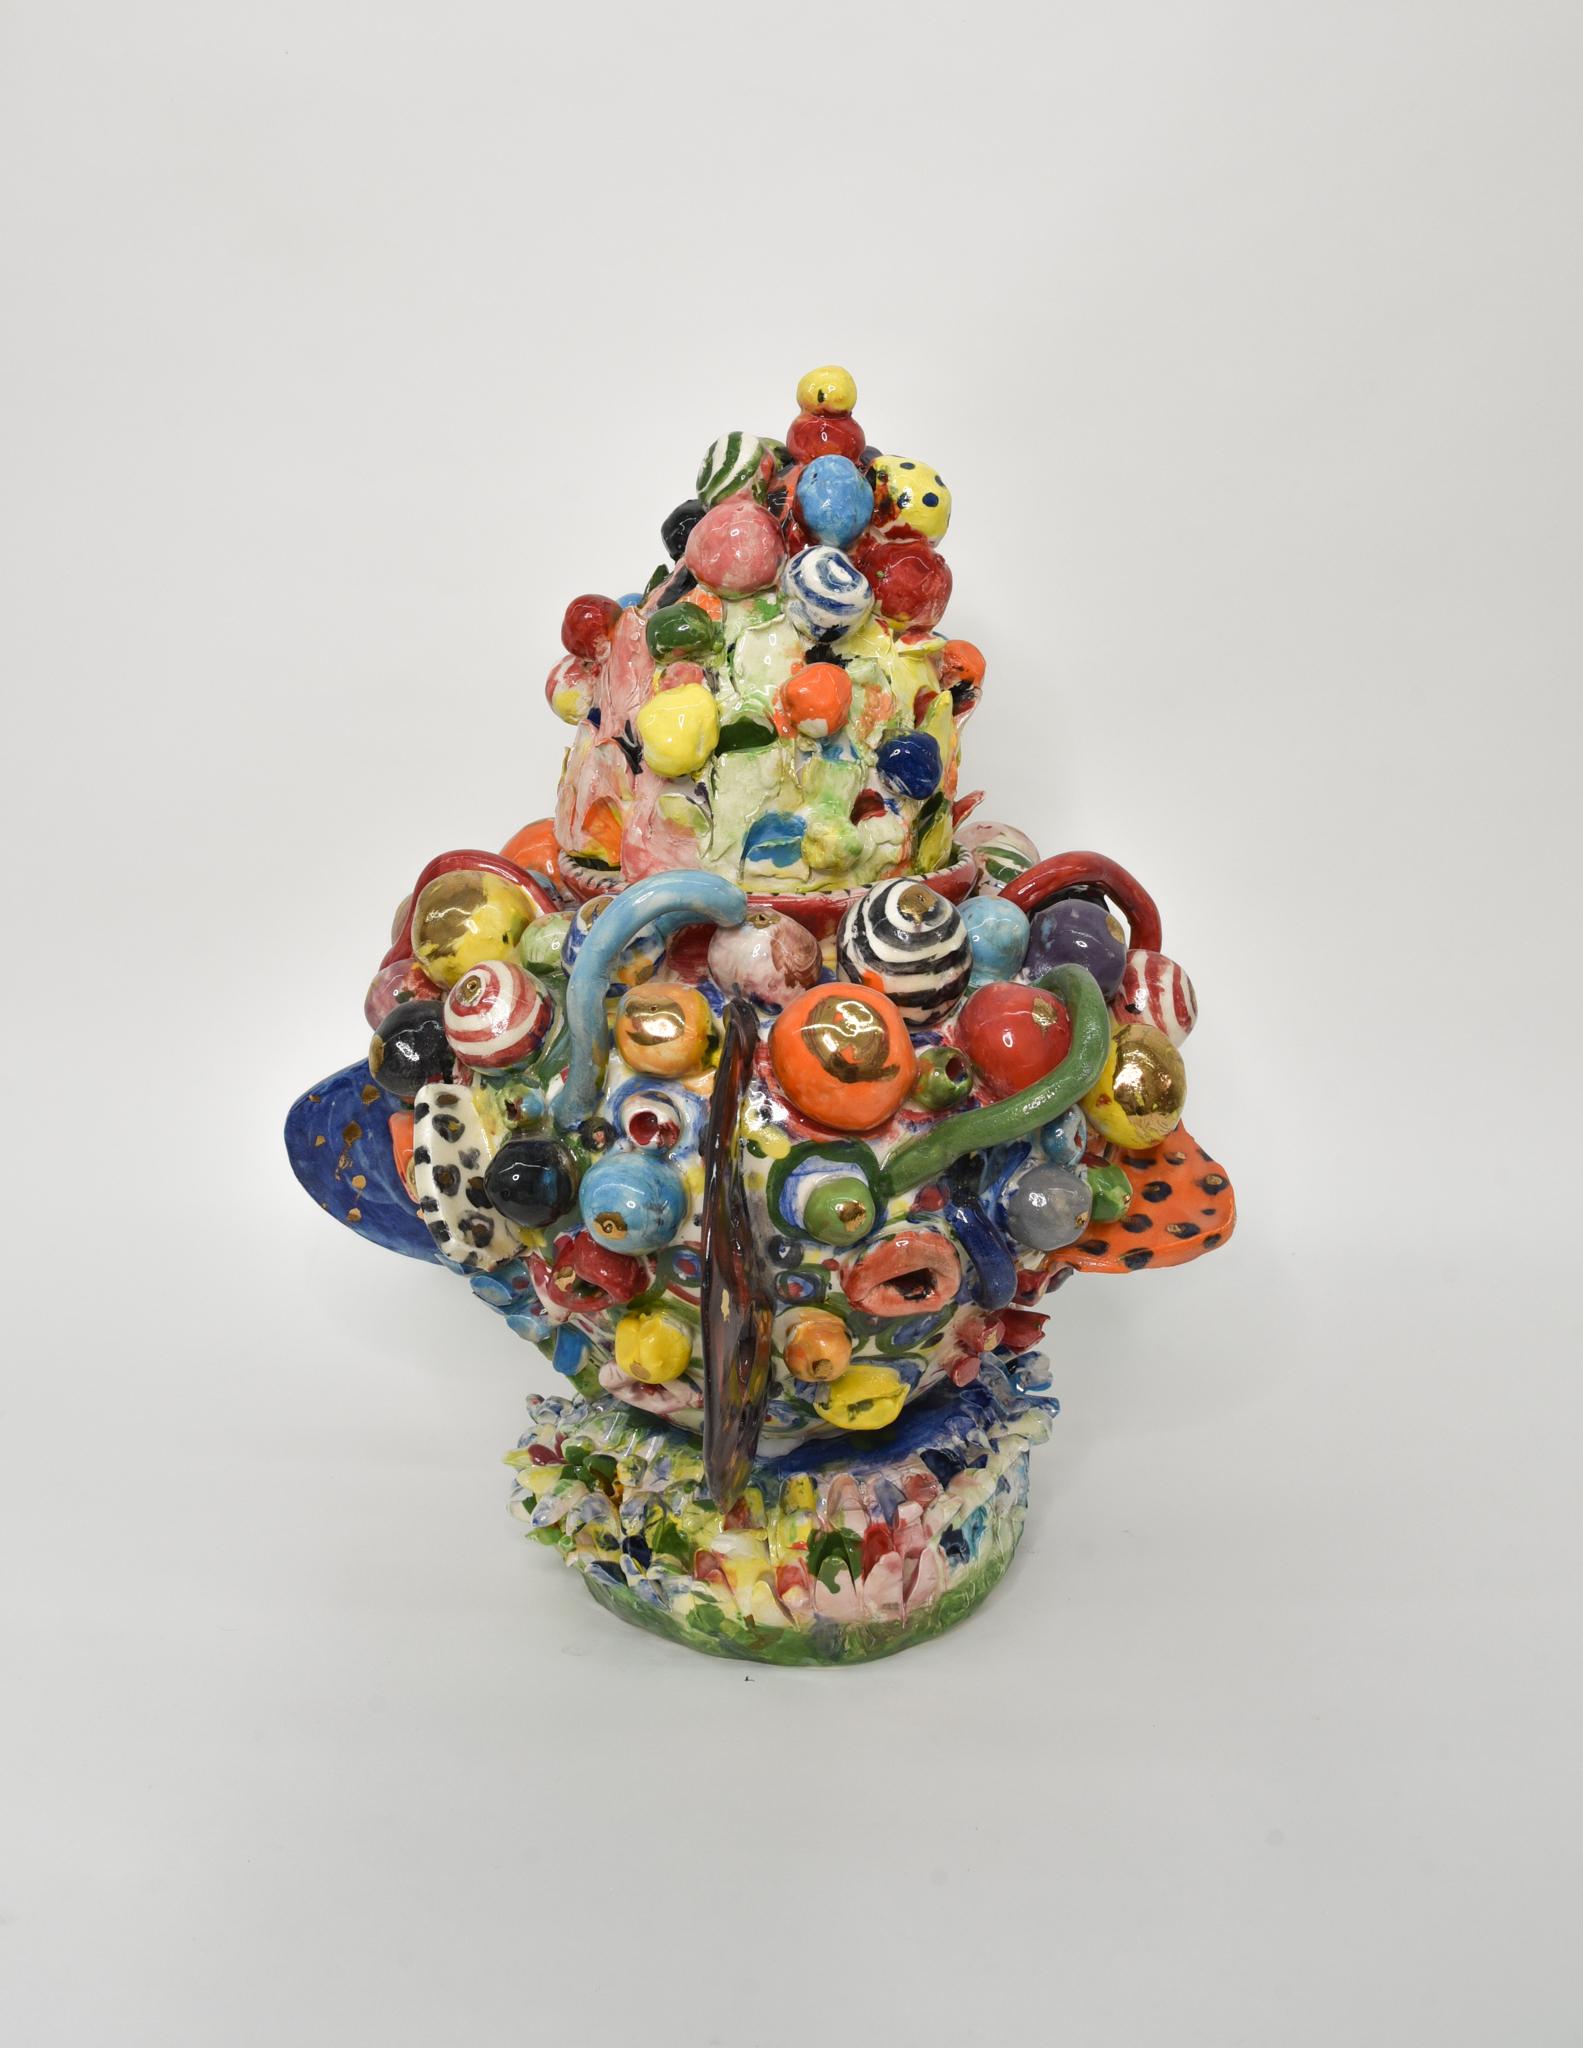 Untitled III. Glazed ceramic abstract jar sculpture - Sculpture by Charo Oquet